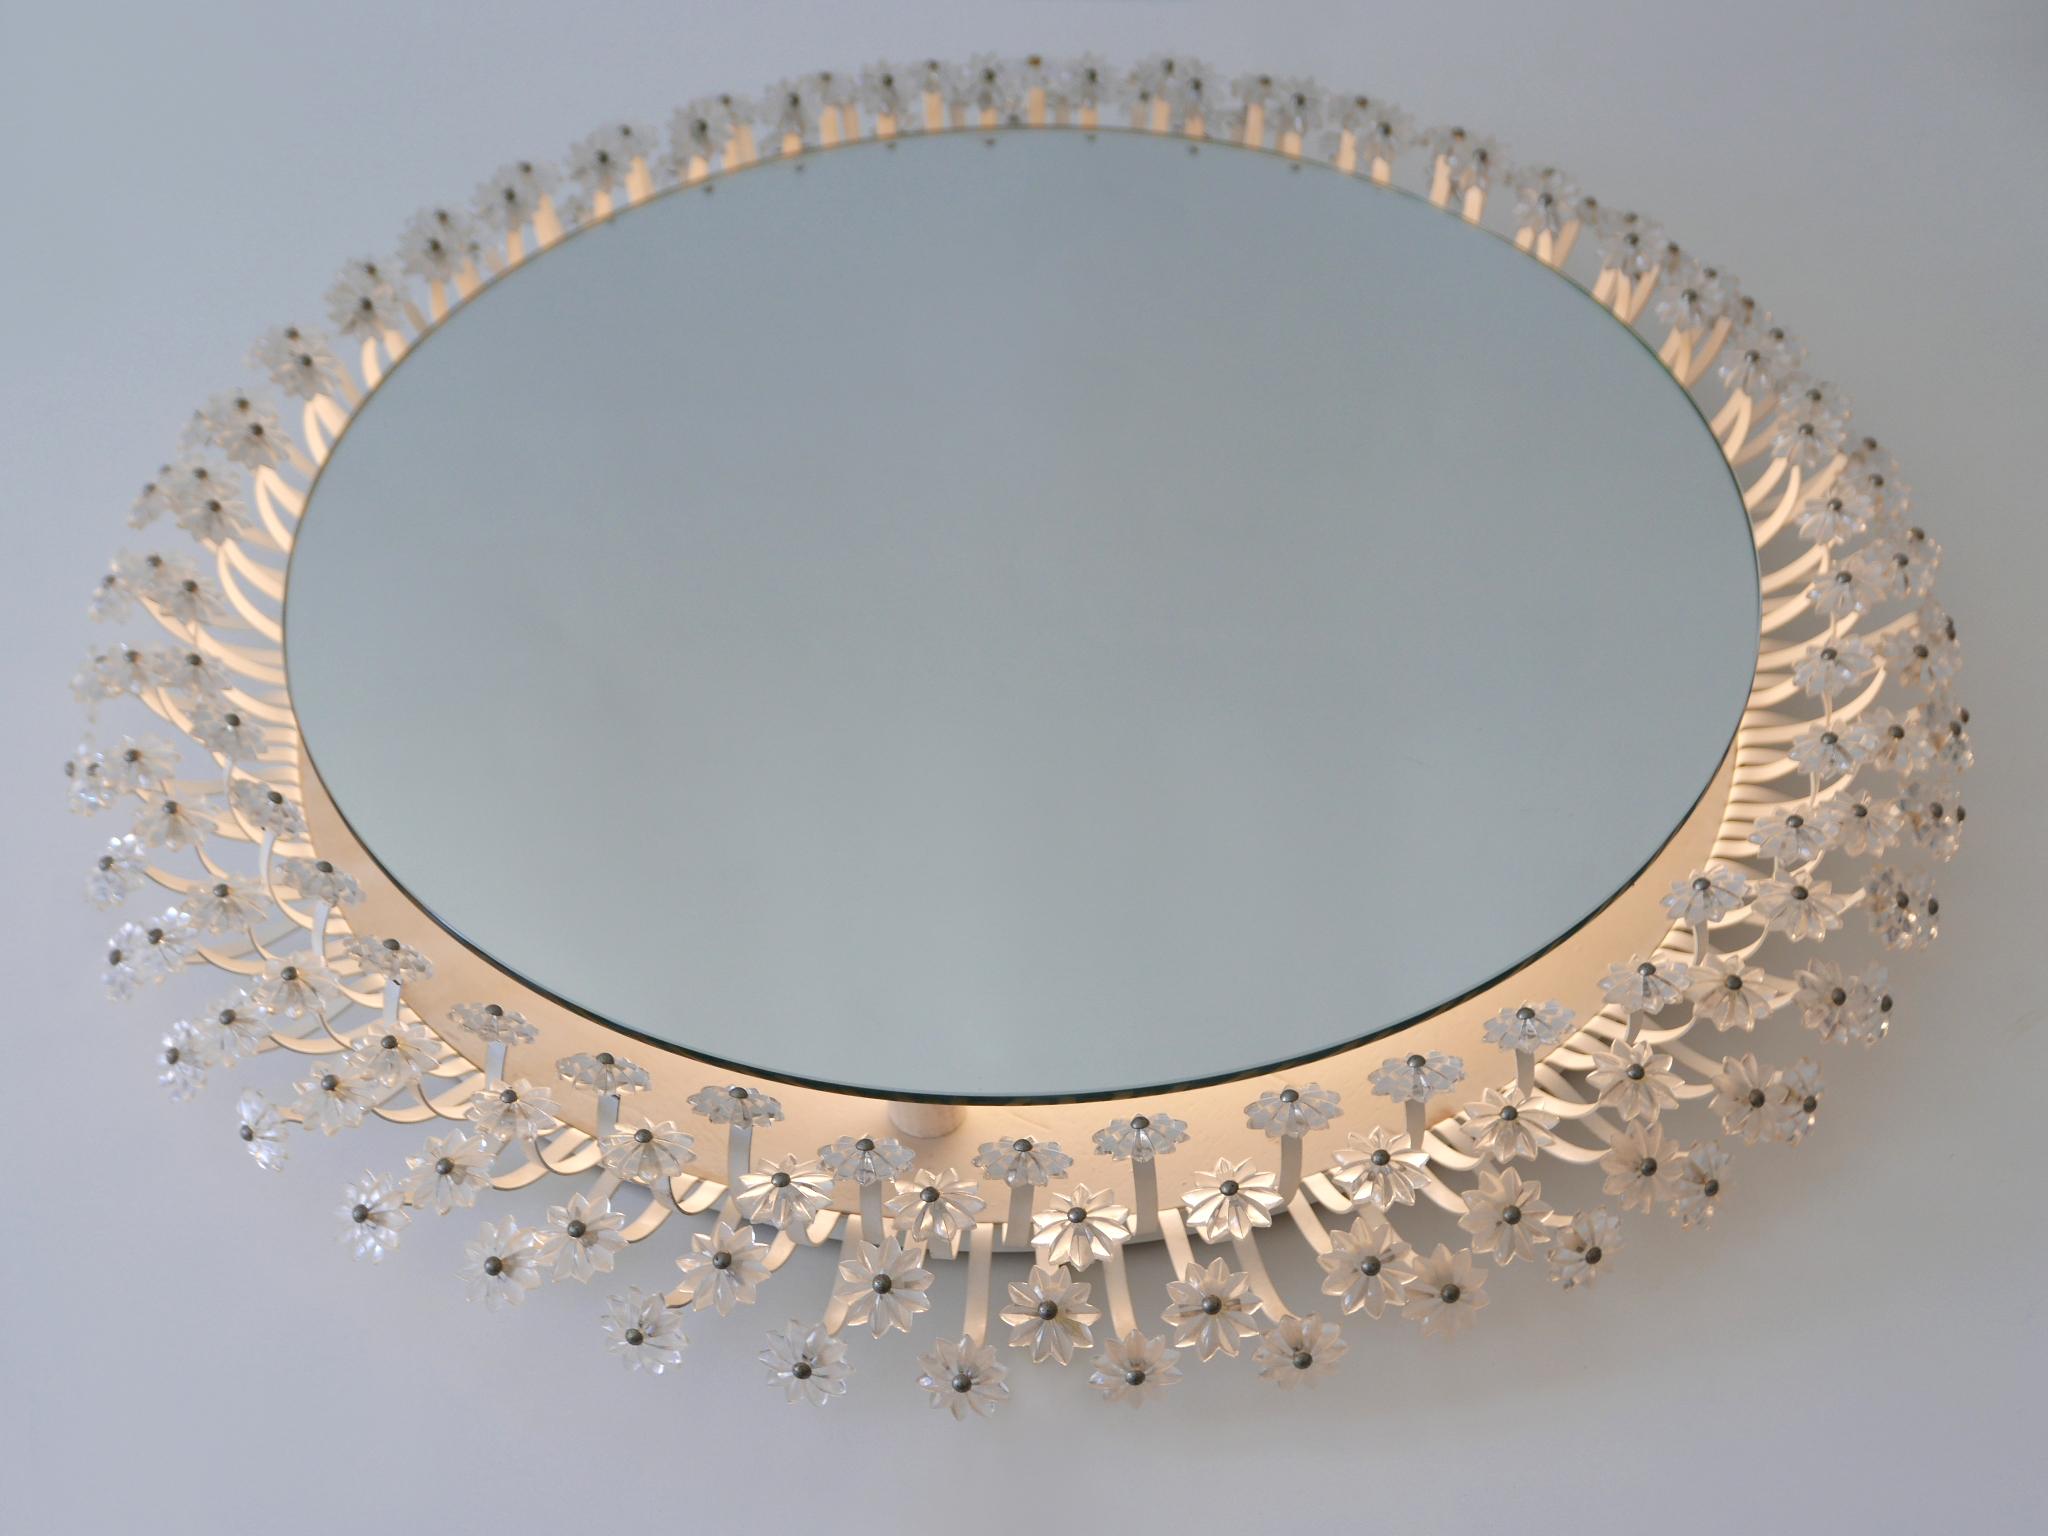 Decorative Mid-Century Modern Backlit Wall Mirror by Schöninger Germany 1960s For Sale 2